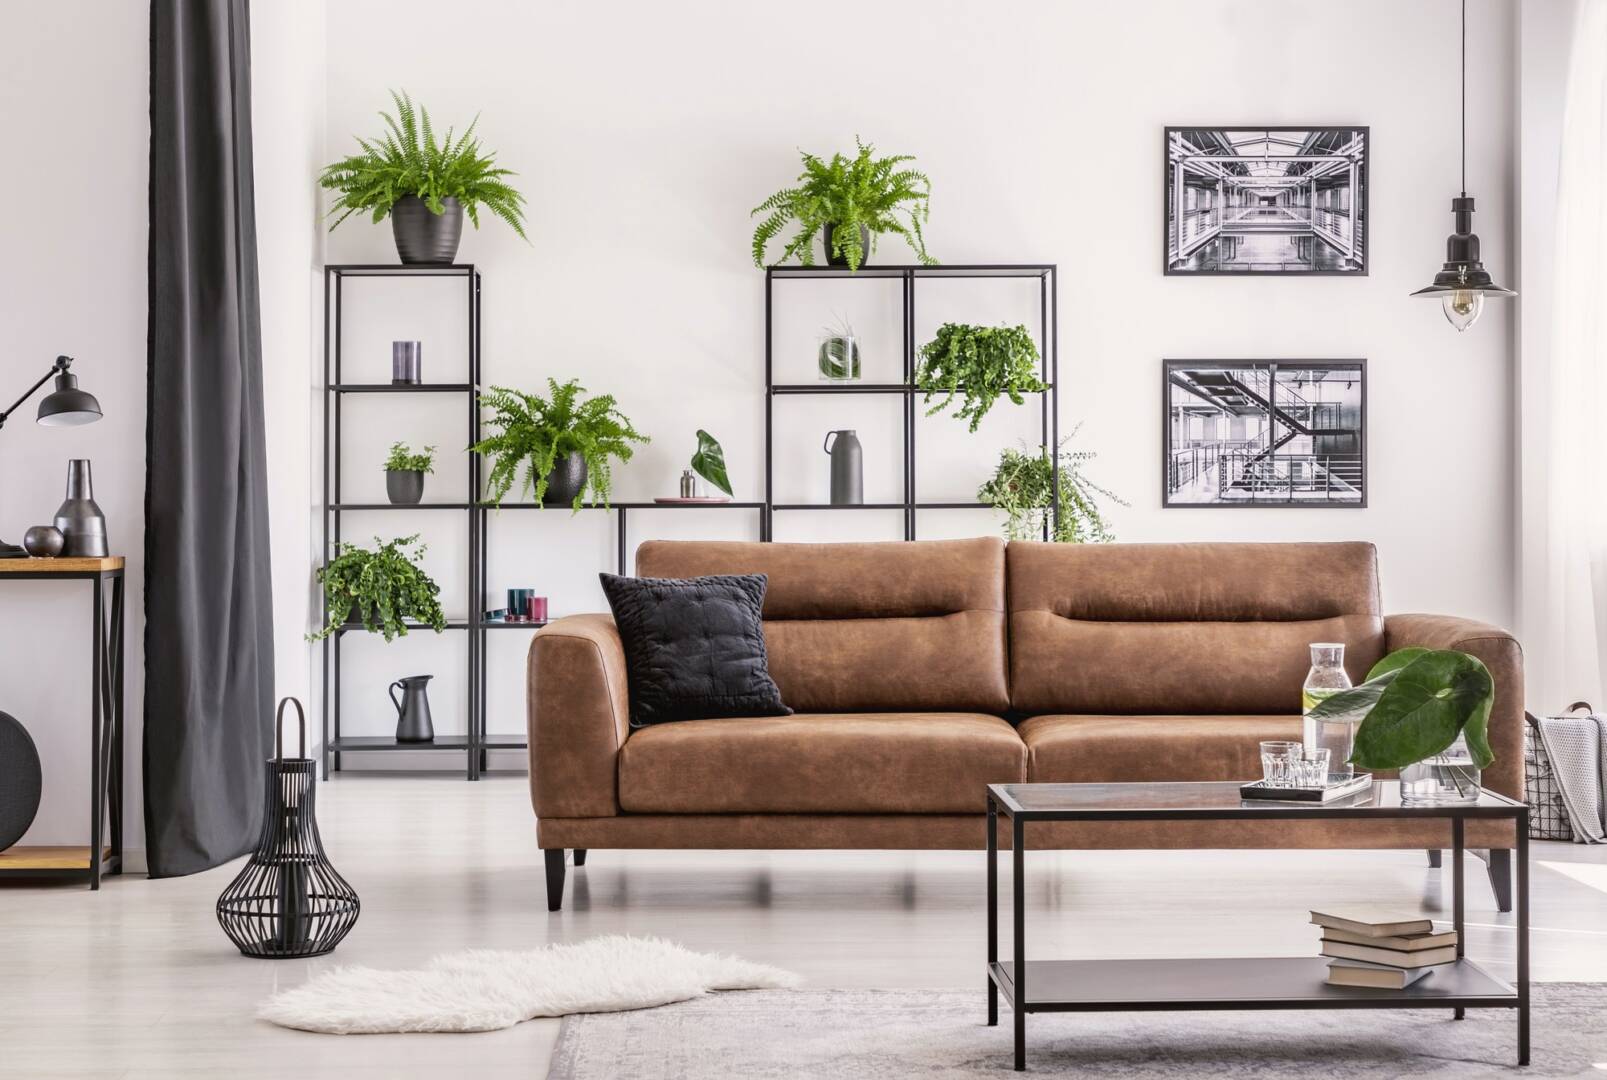 Interior design created by plant lover, different kind of plower